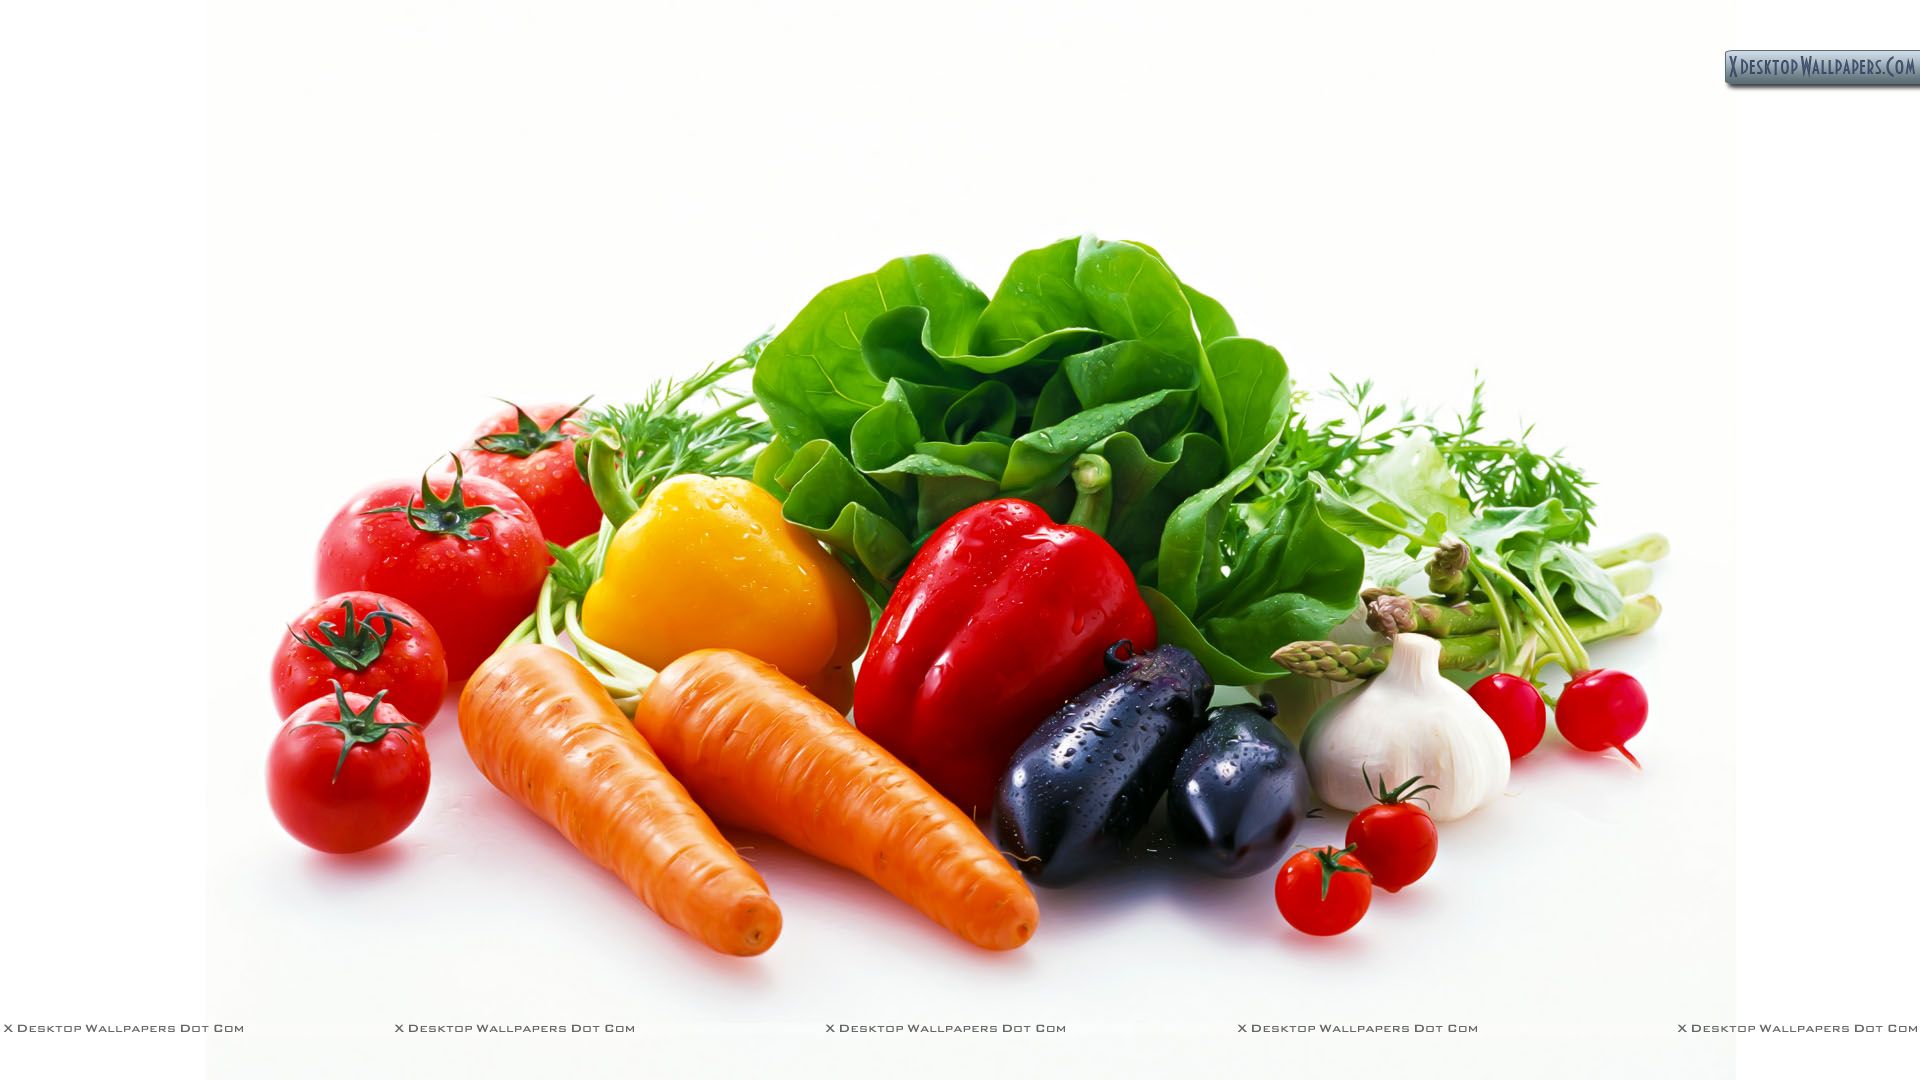 vegetable ready to eat image